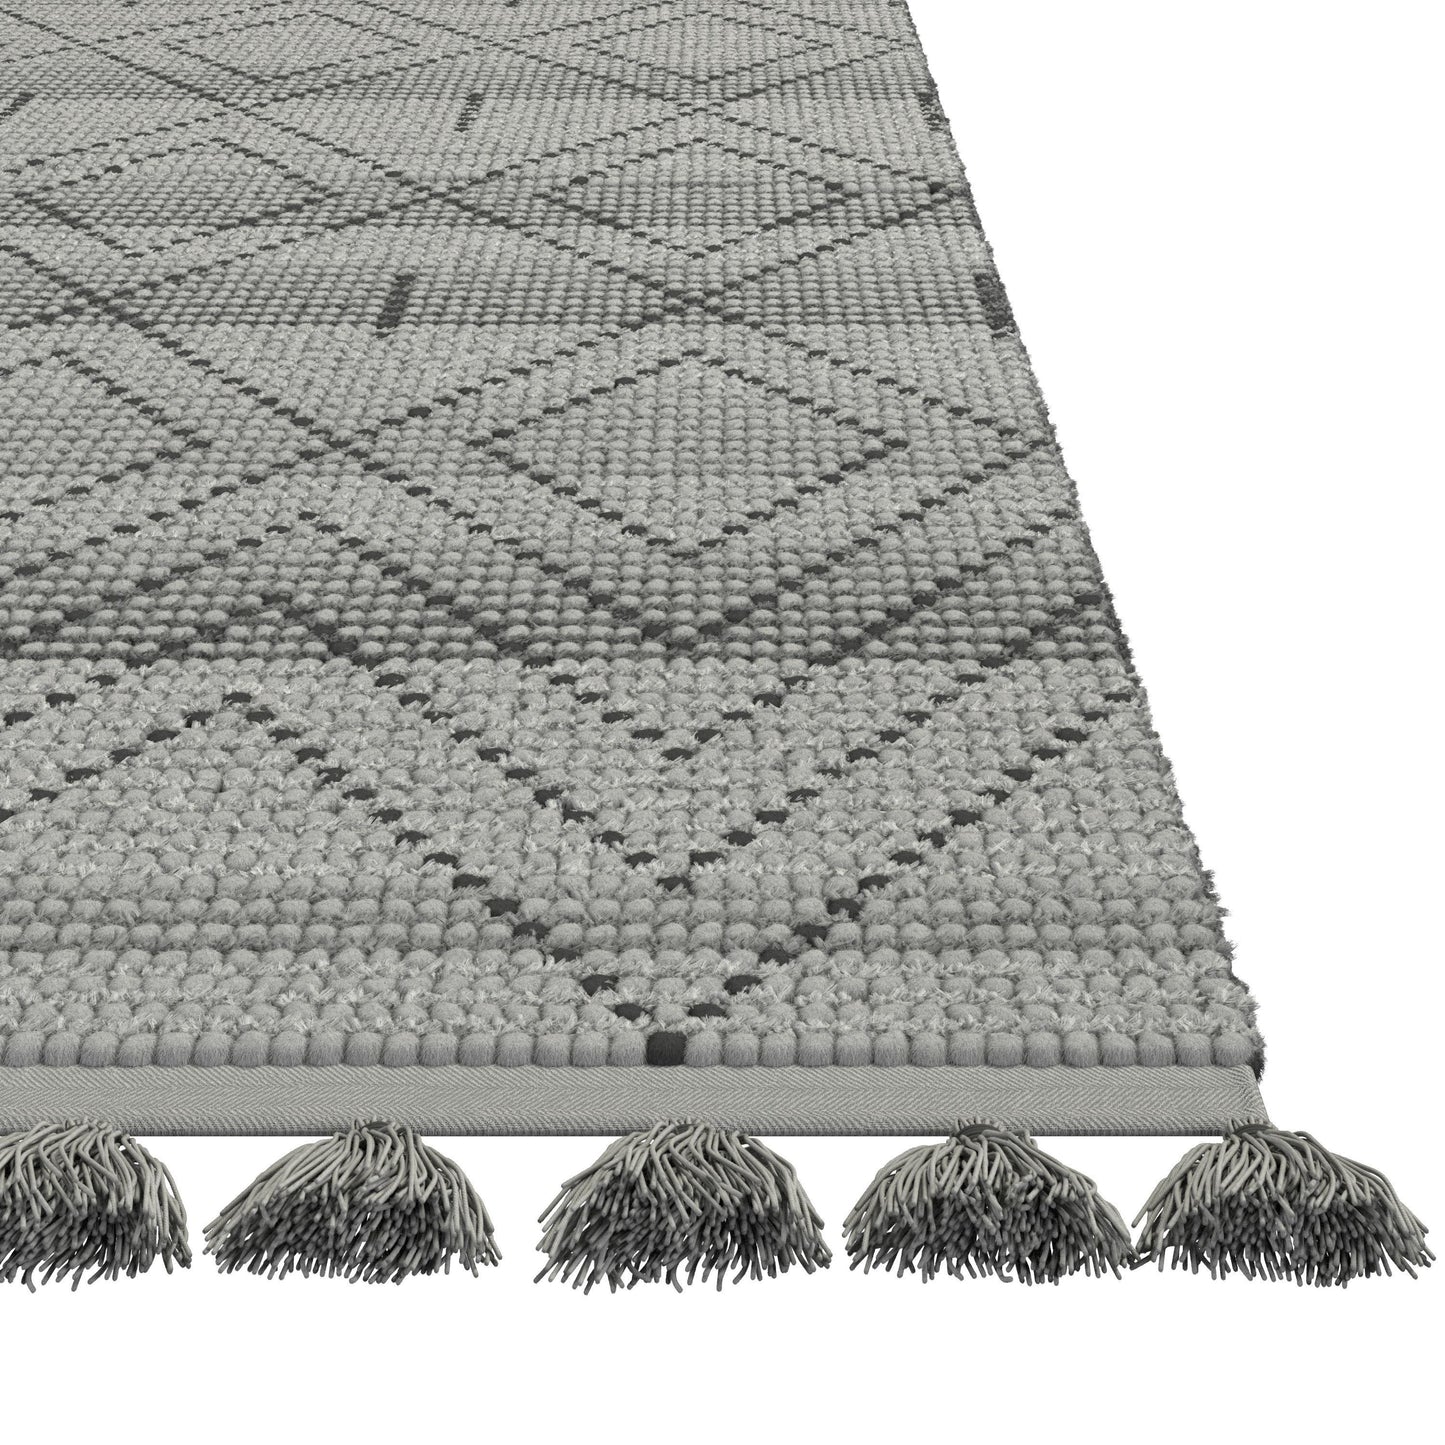 Vail Dowlan Gray and Charcoal - Wool and Cotton Area Rug with Tassels 5x8